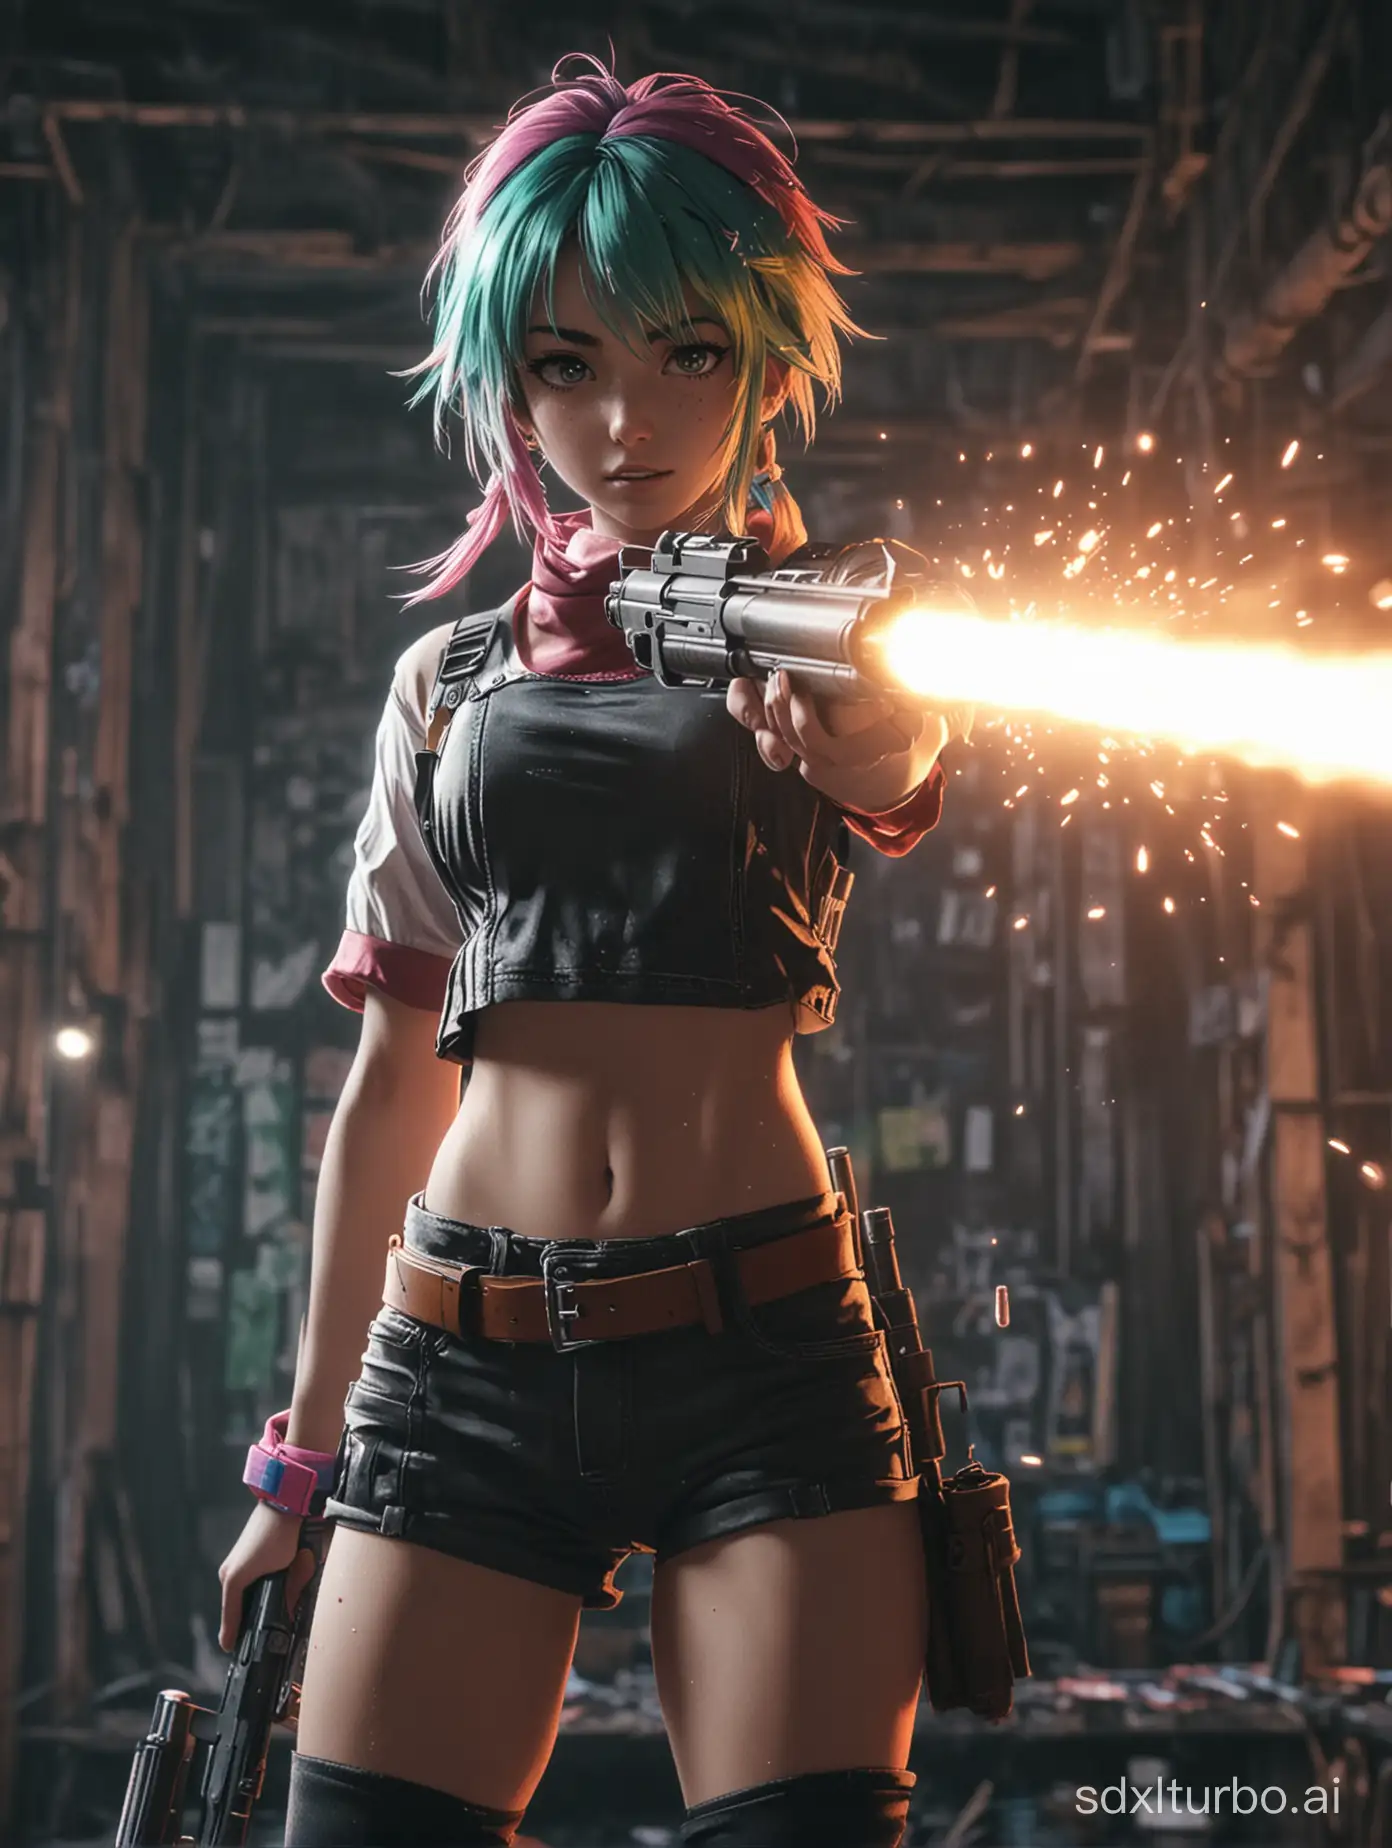 rendered anime girl shooting a bullet, full body,, Serene, Cyberghetto, Oil Pastel Drawing, long shot, Motion graphics, Depth of field, game item, multi colors, Hatecore, moody lighting, 16-bit